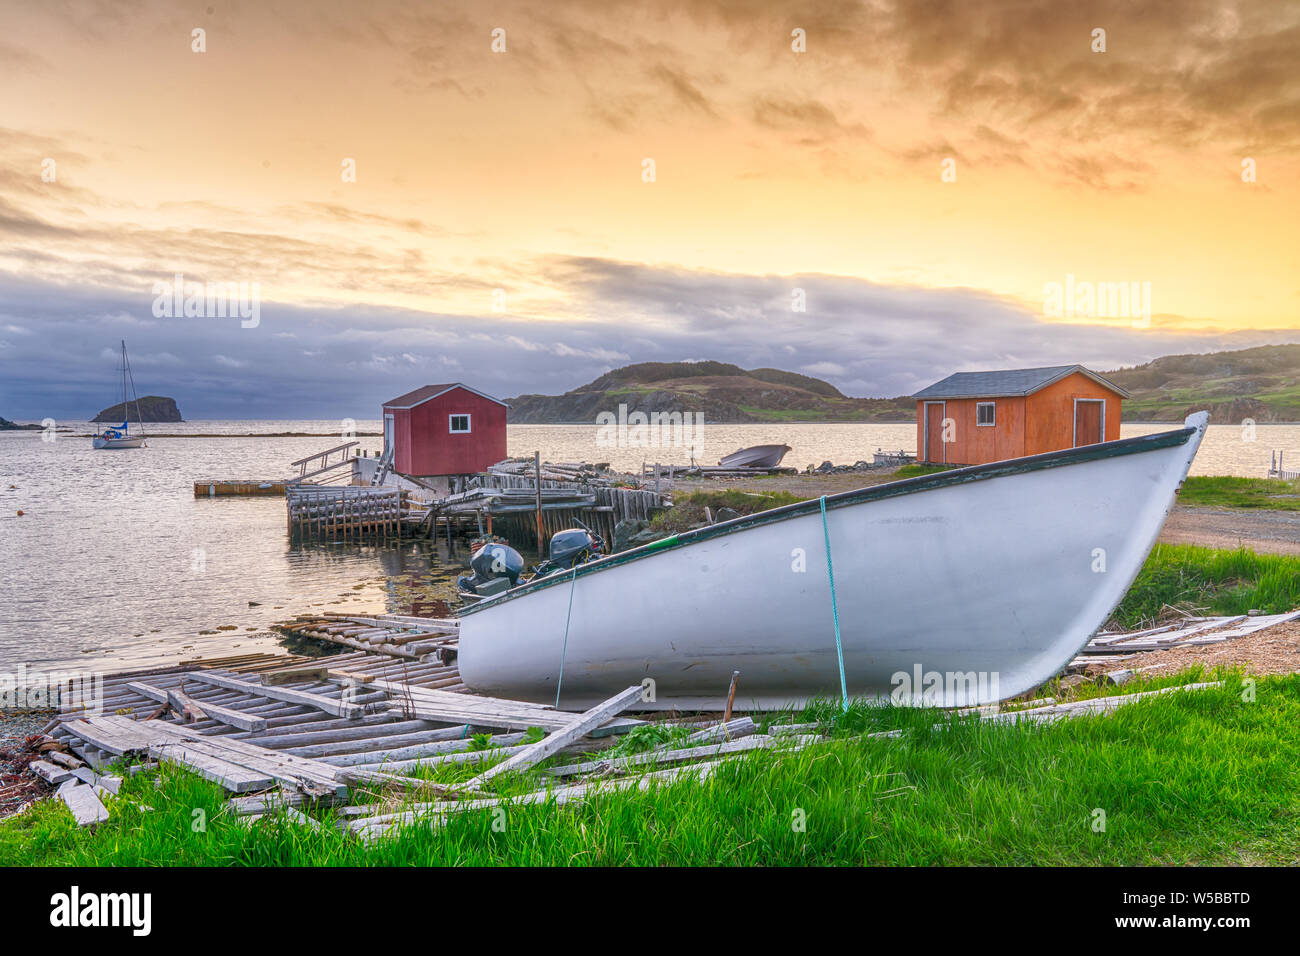 Boats and sheds in coastal fishing village during sunset in Newfoundland, Canada Stock Photo